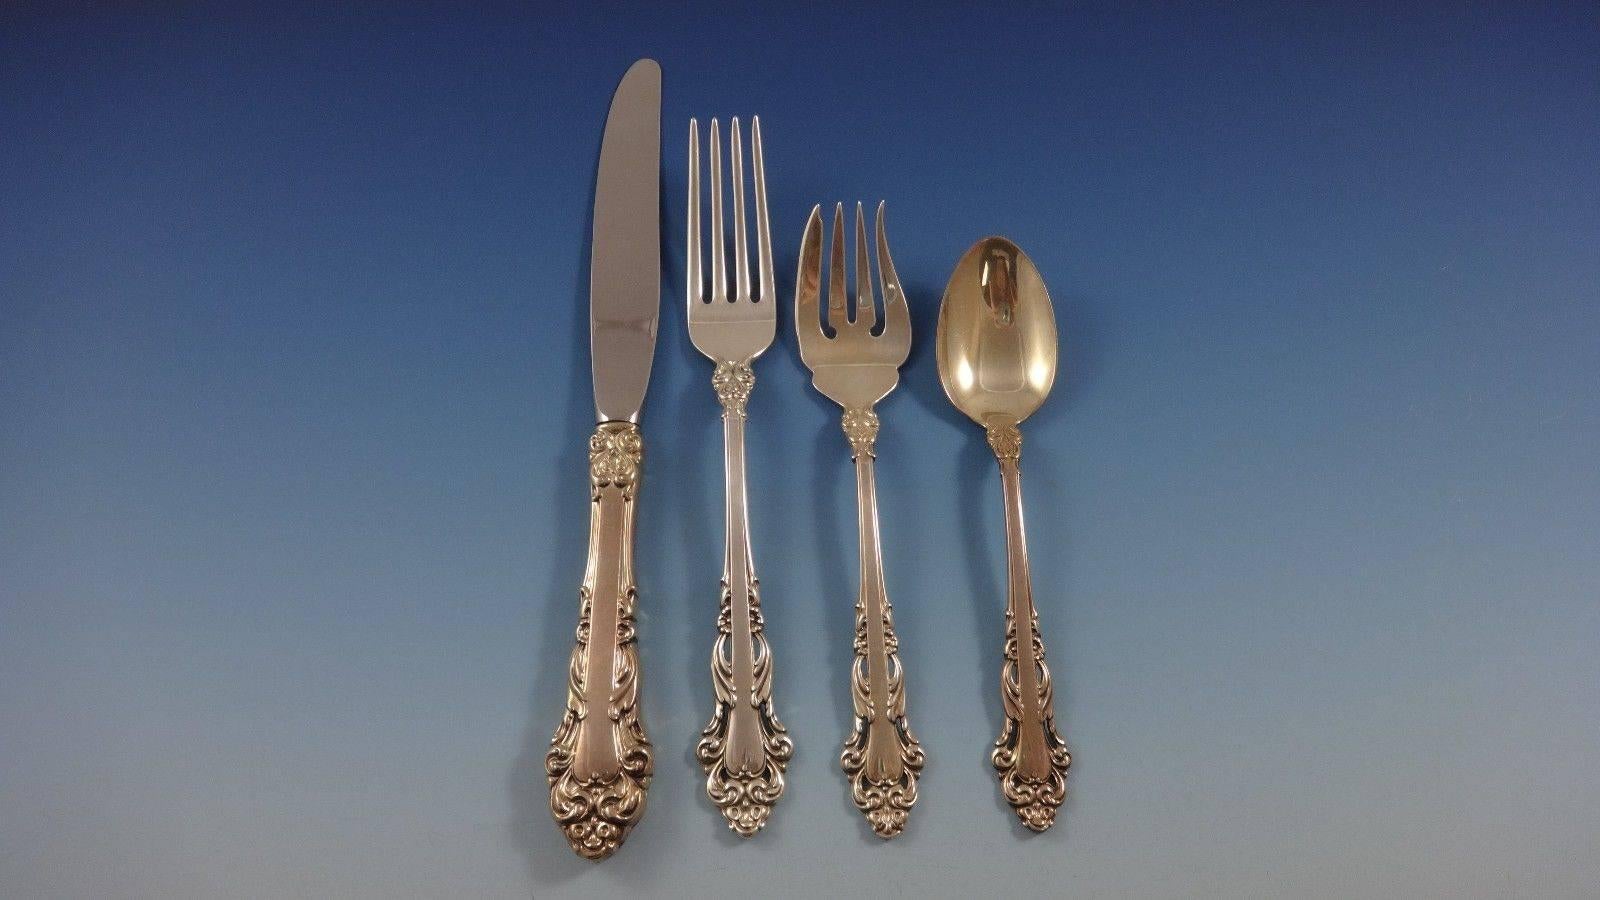 Grande Renaissance by Reed & Barton Sterling Silver Flatware 12 Set - 48 pieces. This set includes: 

12 KNIVES, 9 1/8